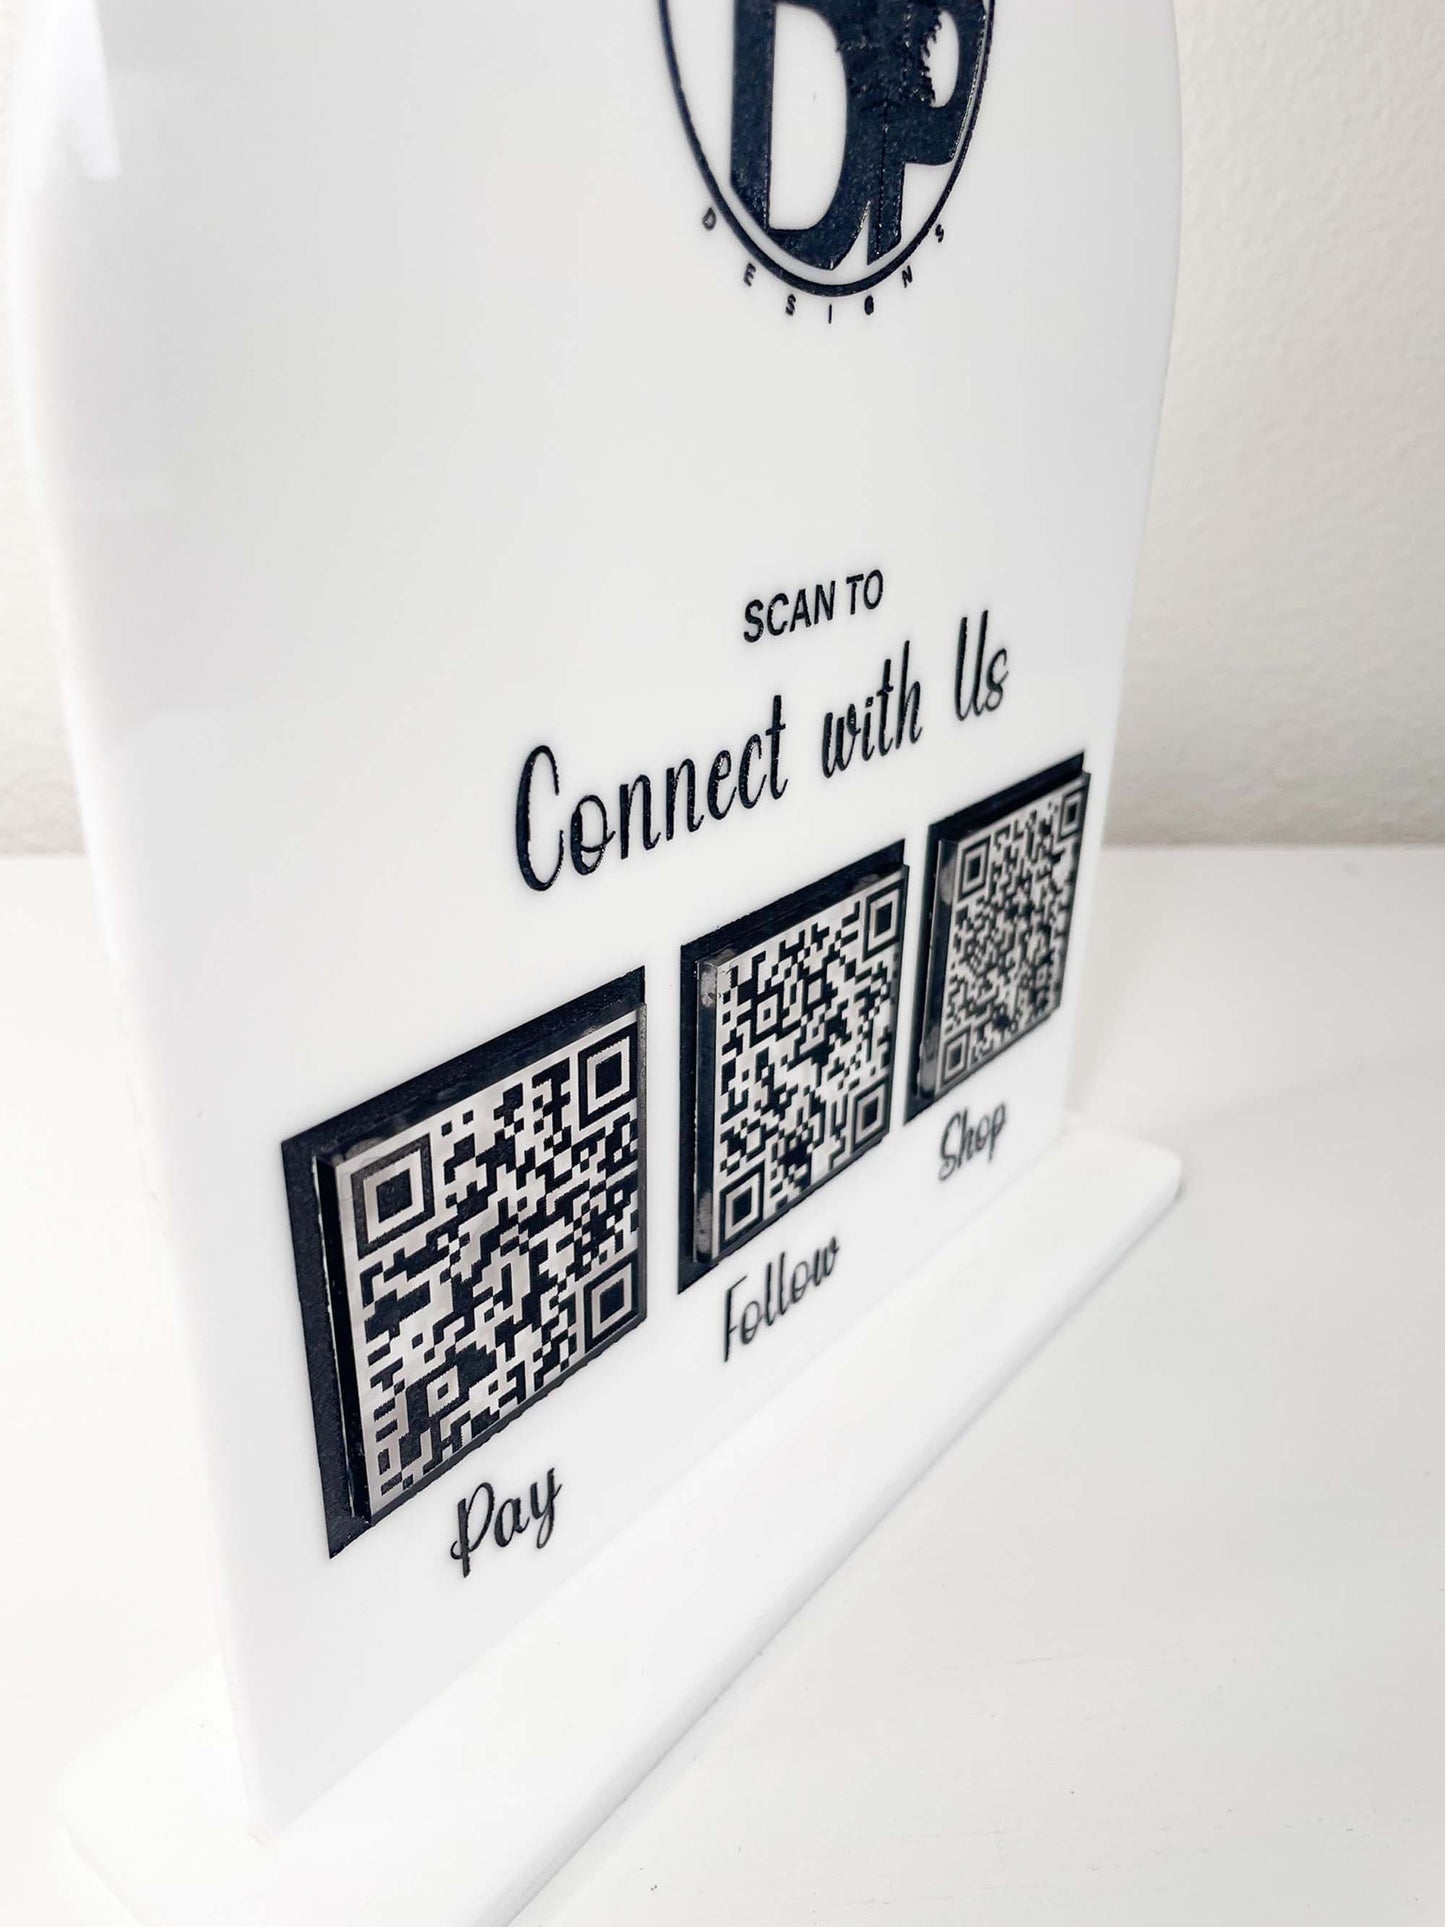 QR code sign large, Market sign, Customizable Business Connect sign. QR code connect with us sign. Vendor, Market QR code scan sign.